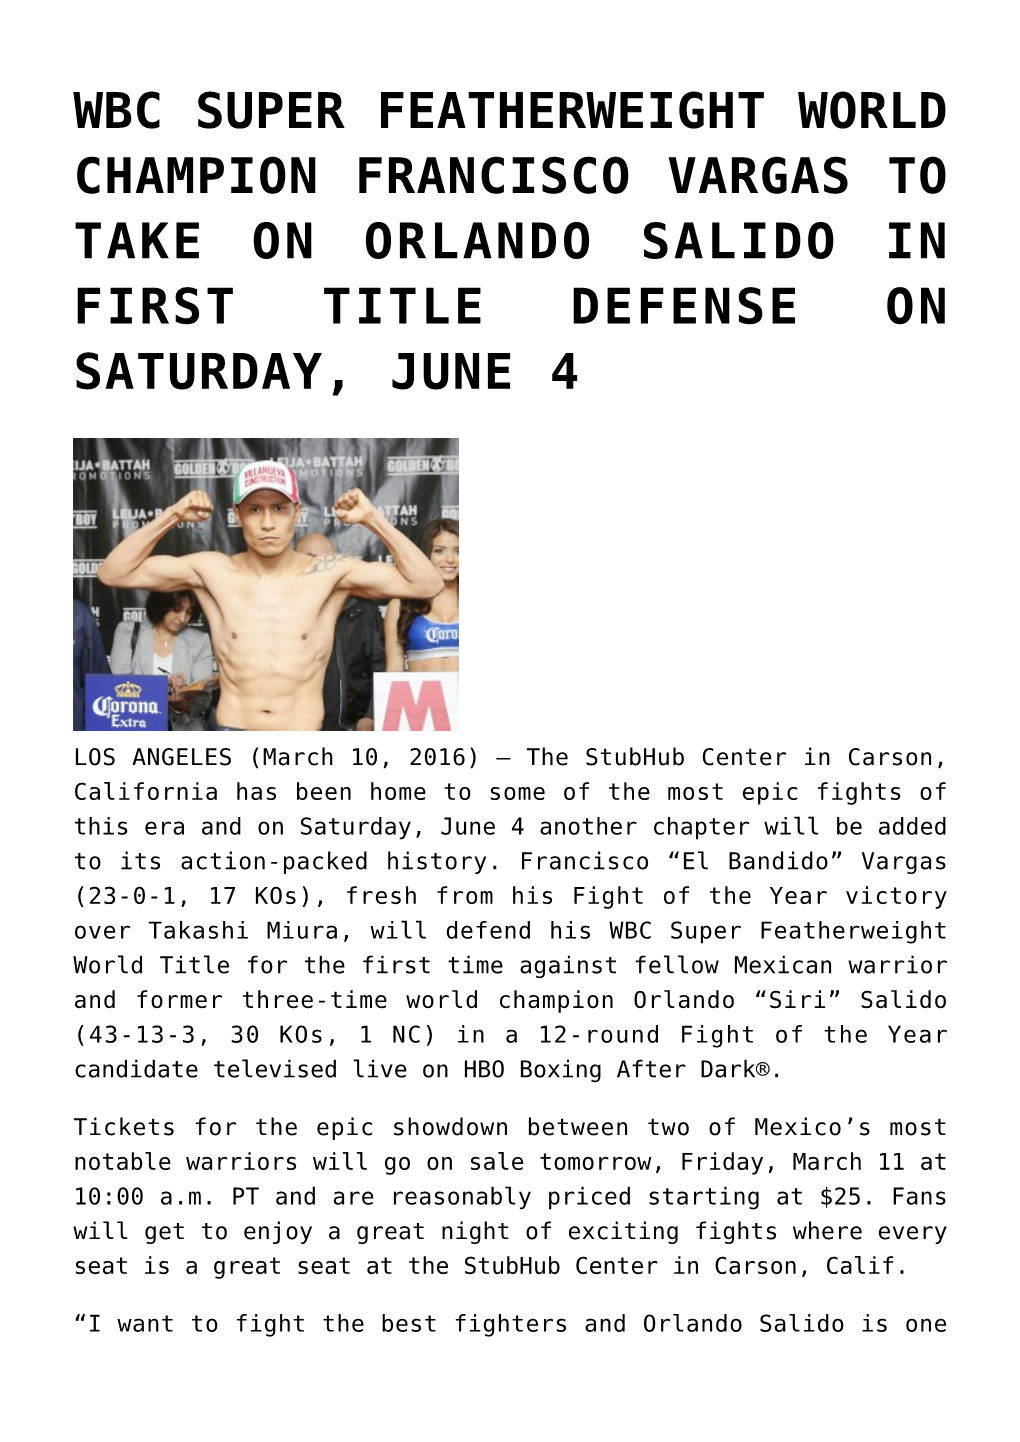 Wbc Super Featherweight World Champion Francisco Vargas to Take on Orlando Salido in First Title Defense on Saturday, June 4